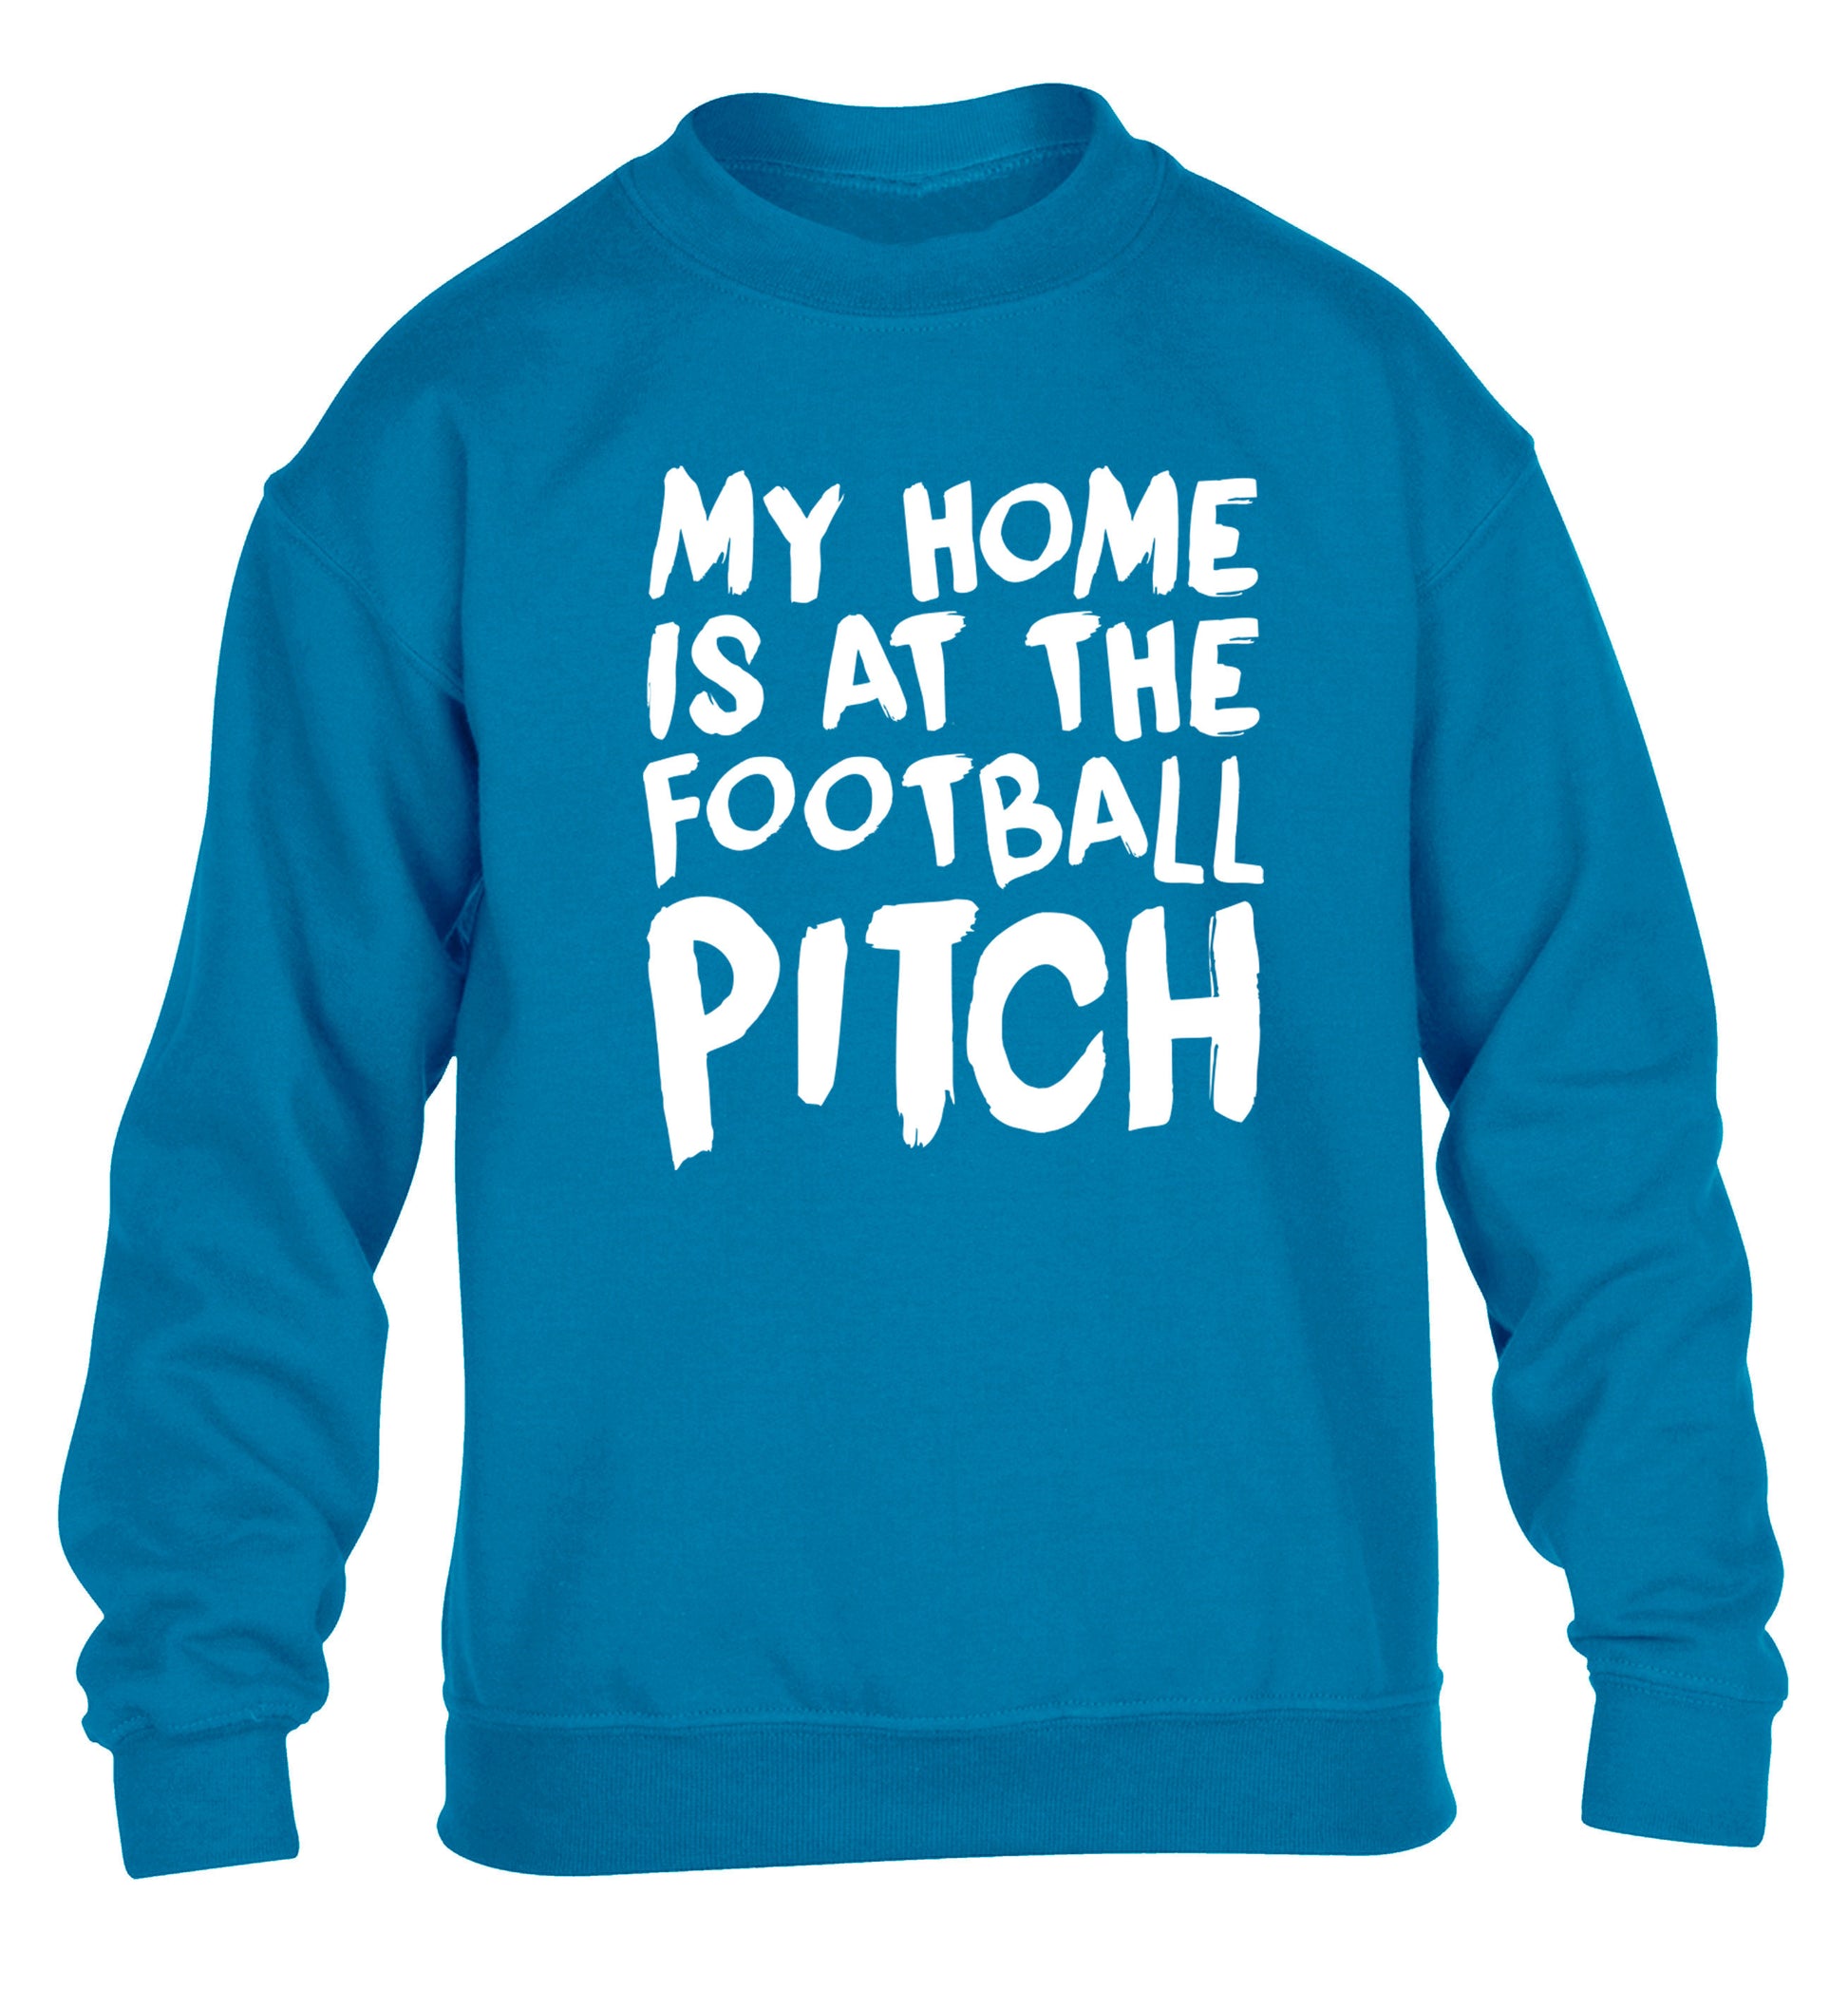 My home is at the football pitch children's blue sweater 12-14 Years